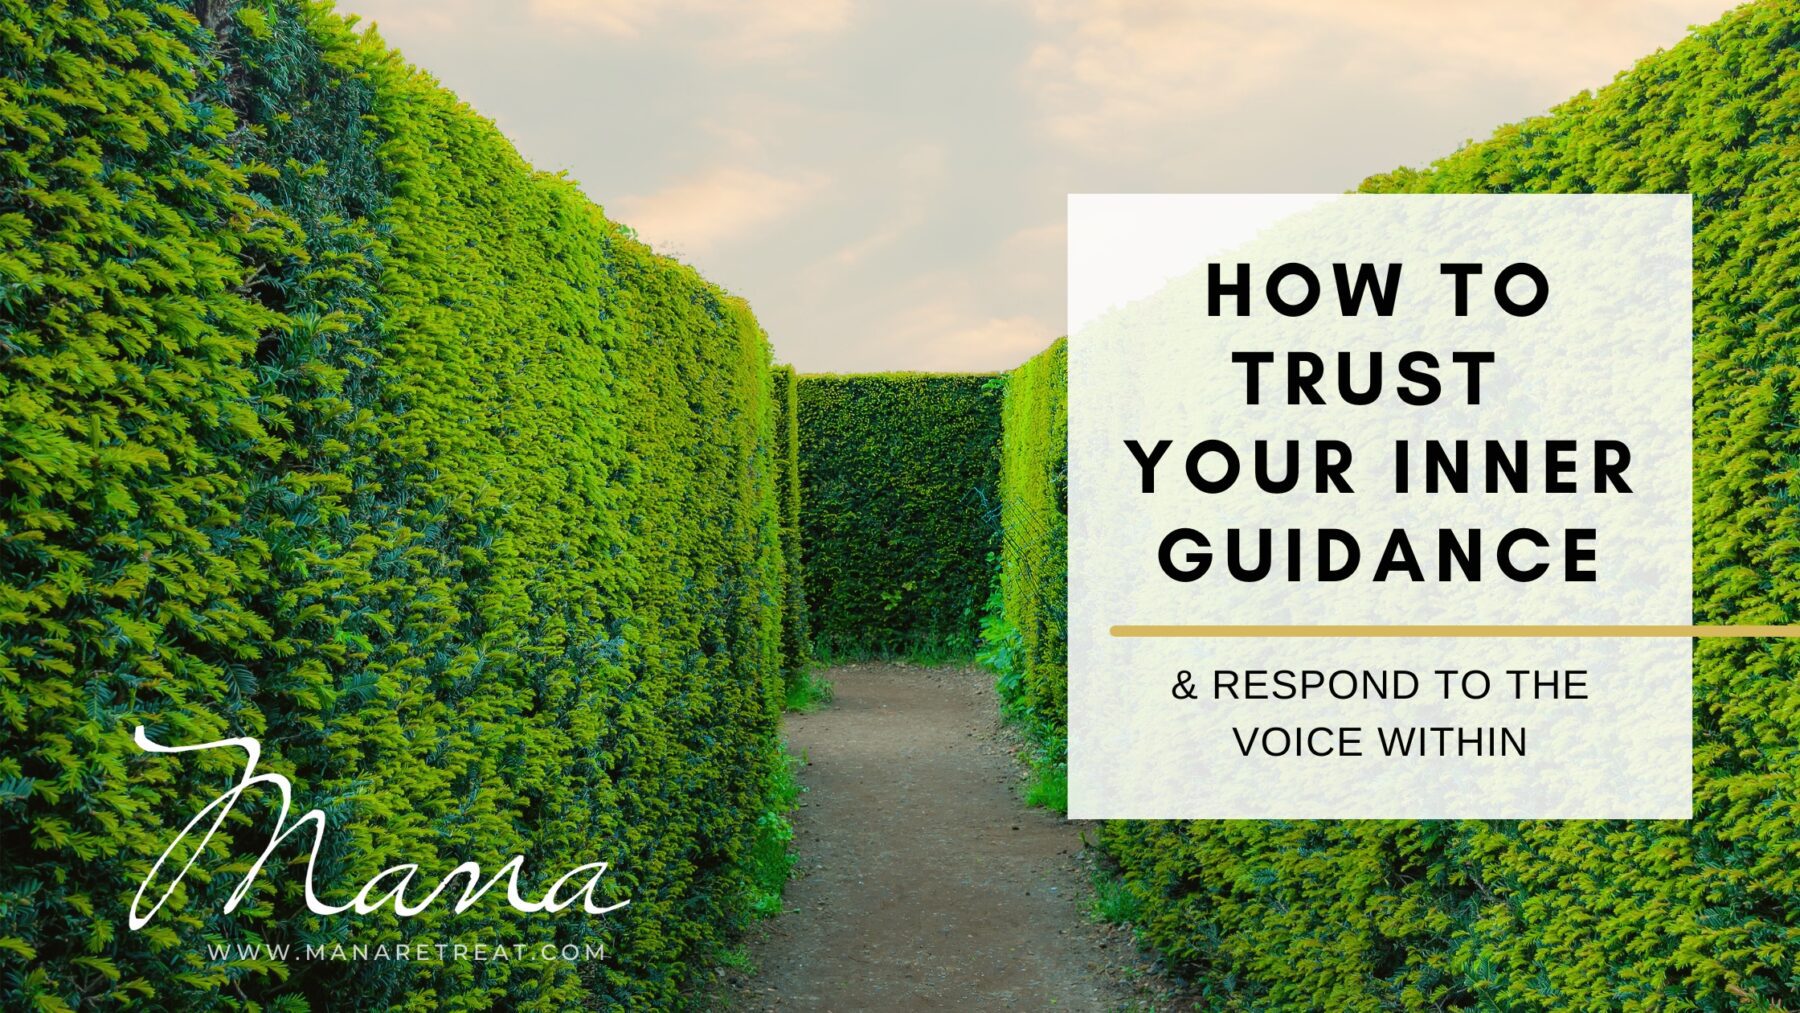 How to trust your inner guidance and respond to the voice within